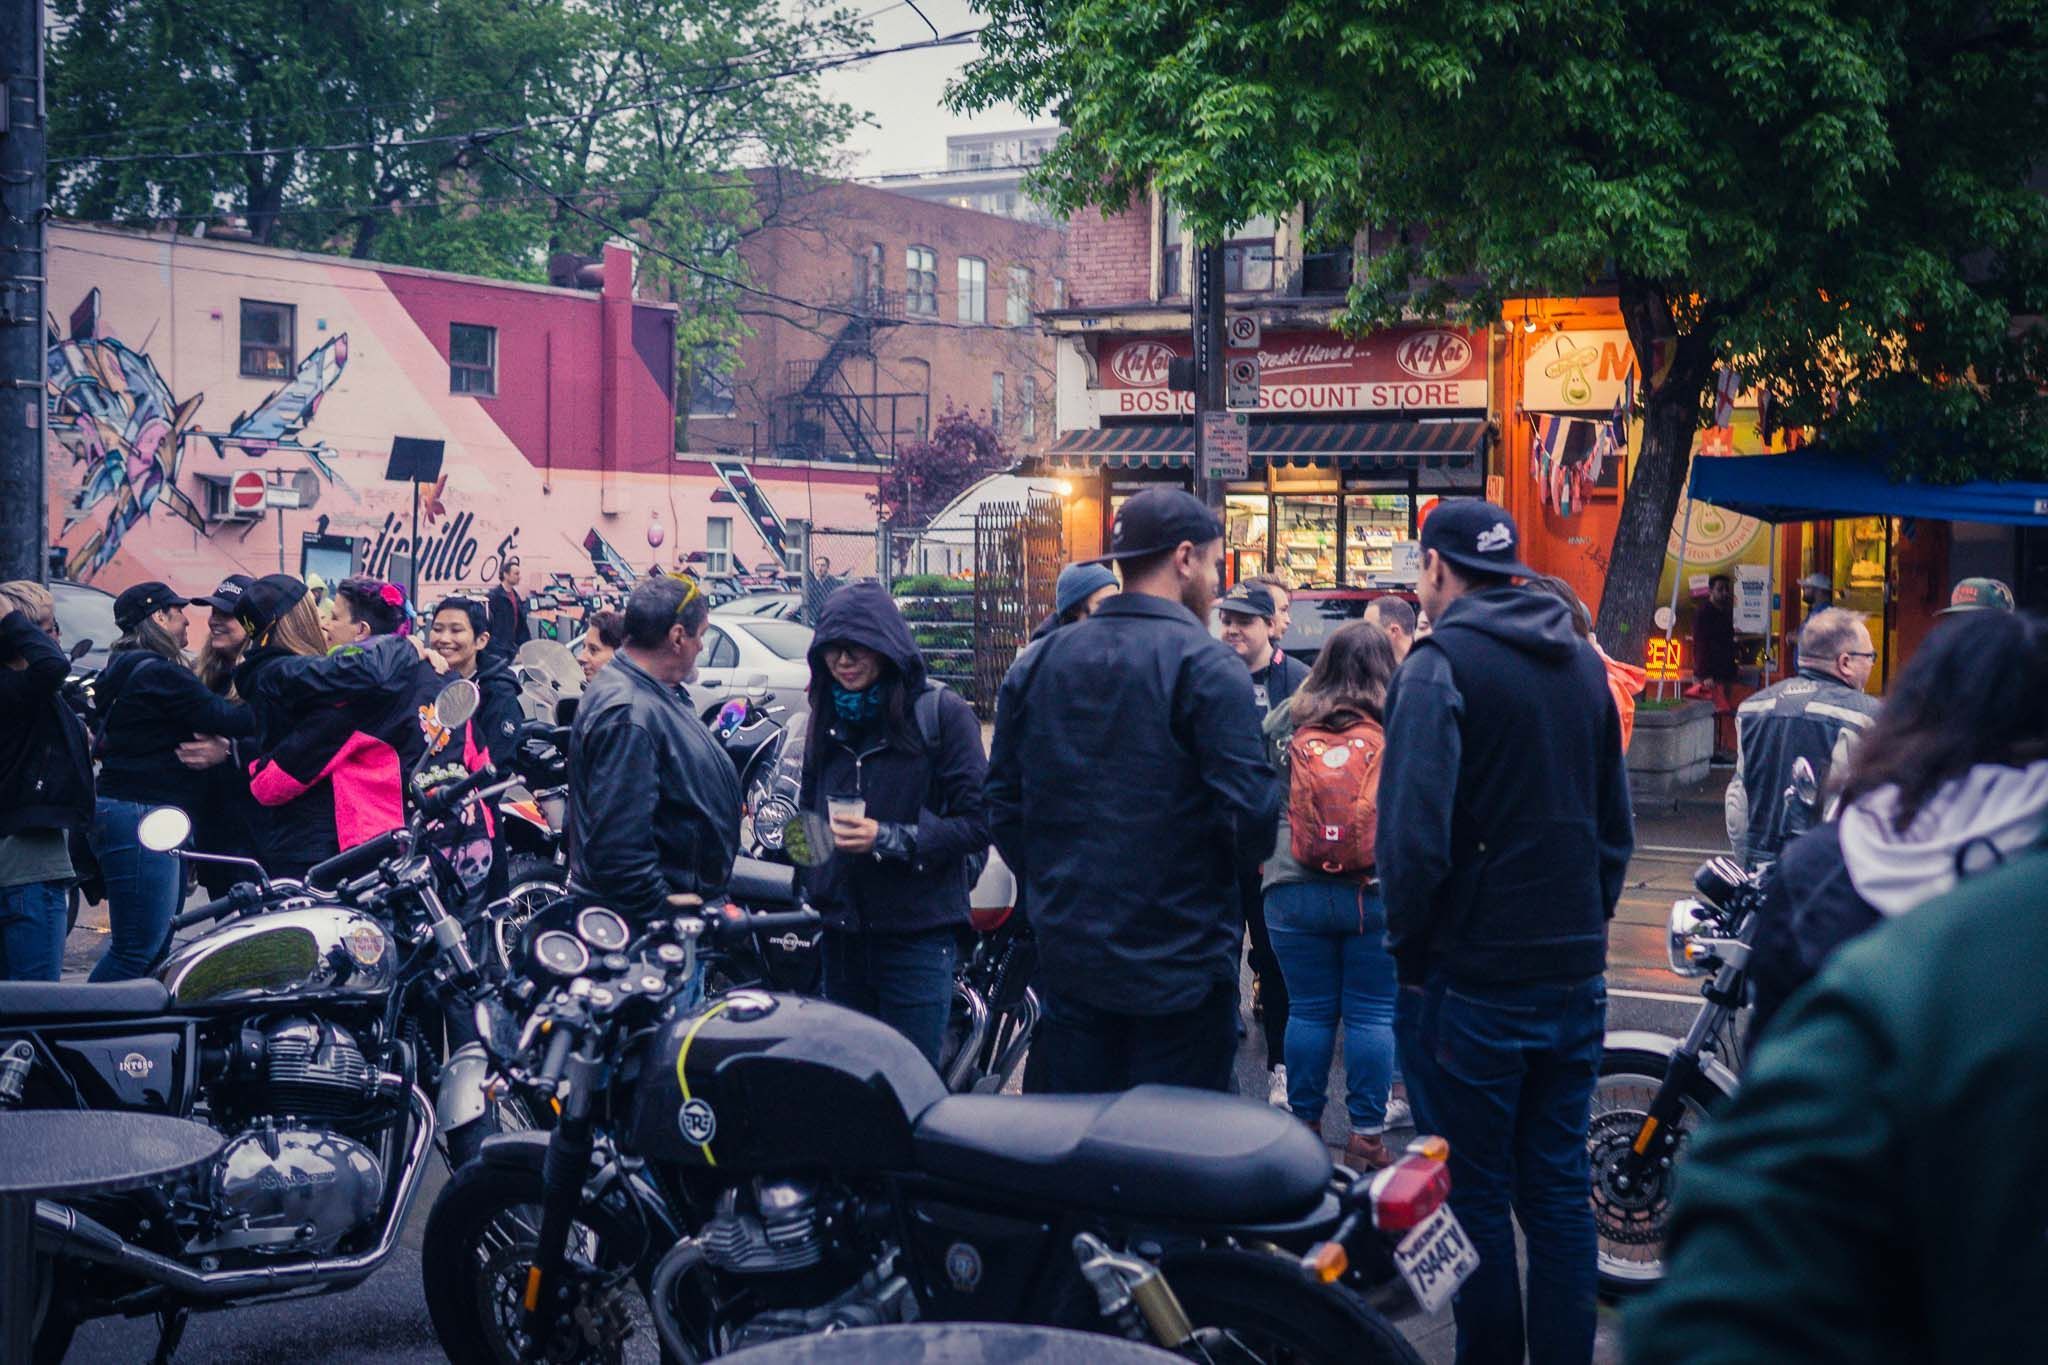 A smaller, damper Moto Social crowd was there to ogle the bikes